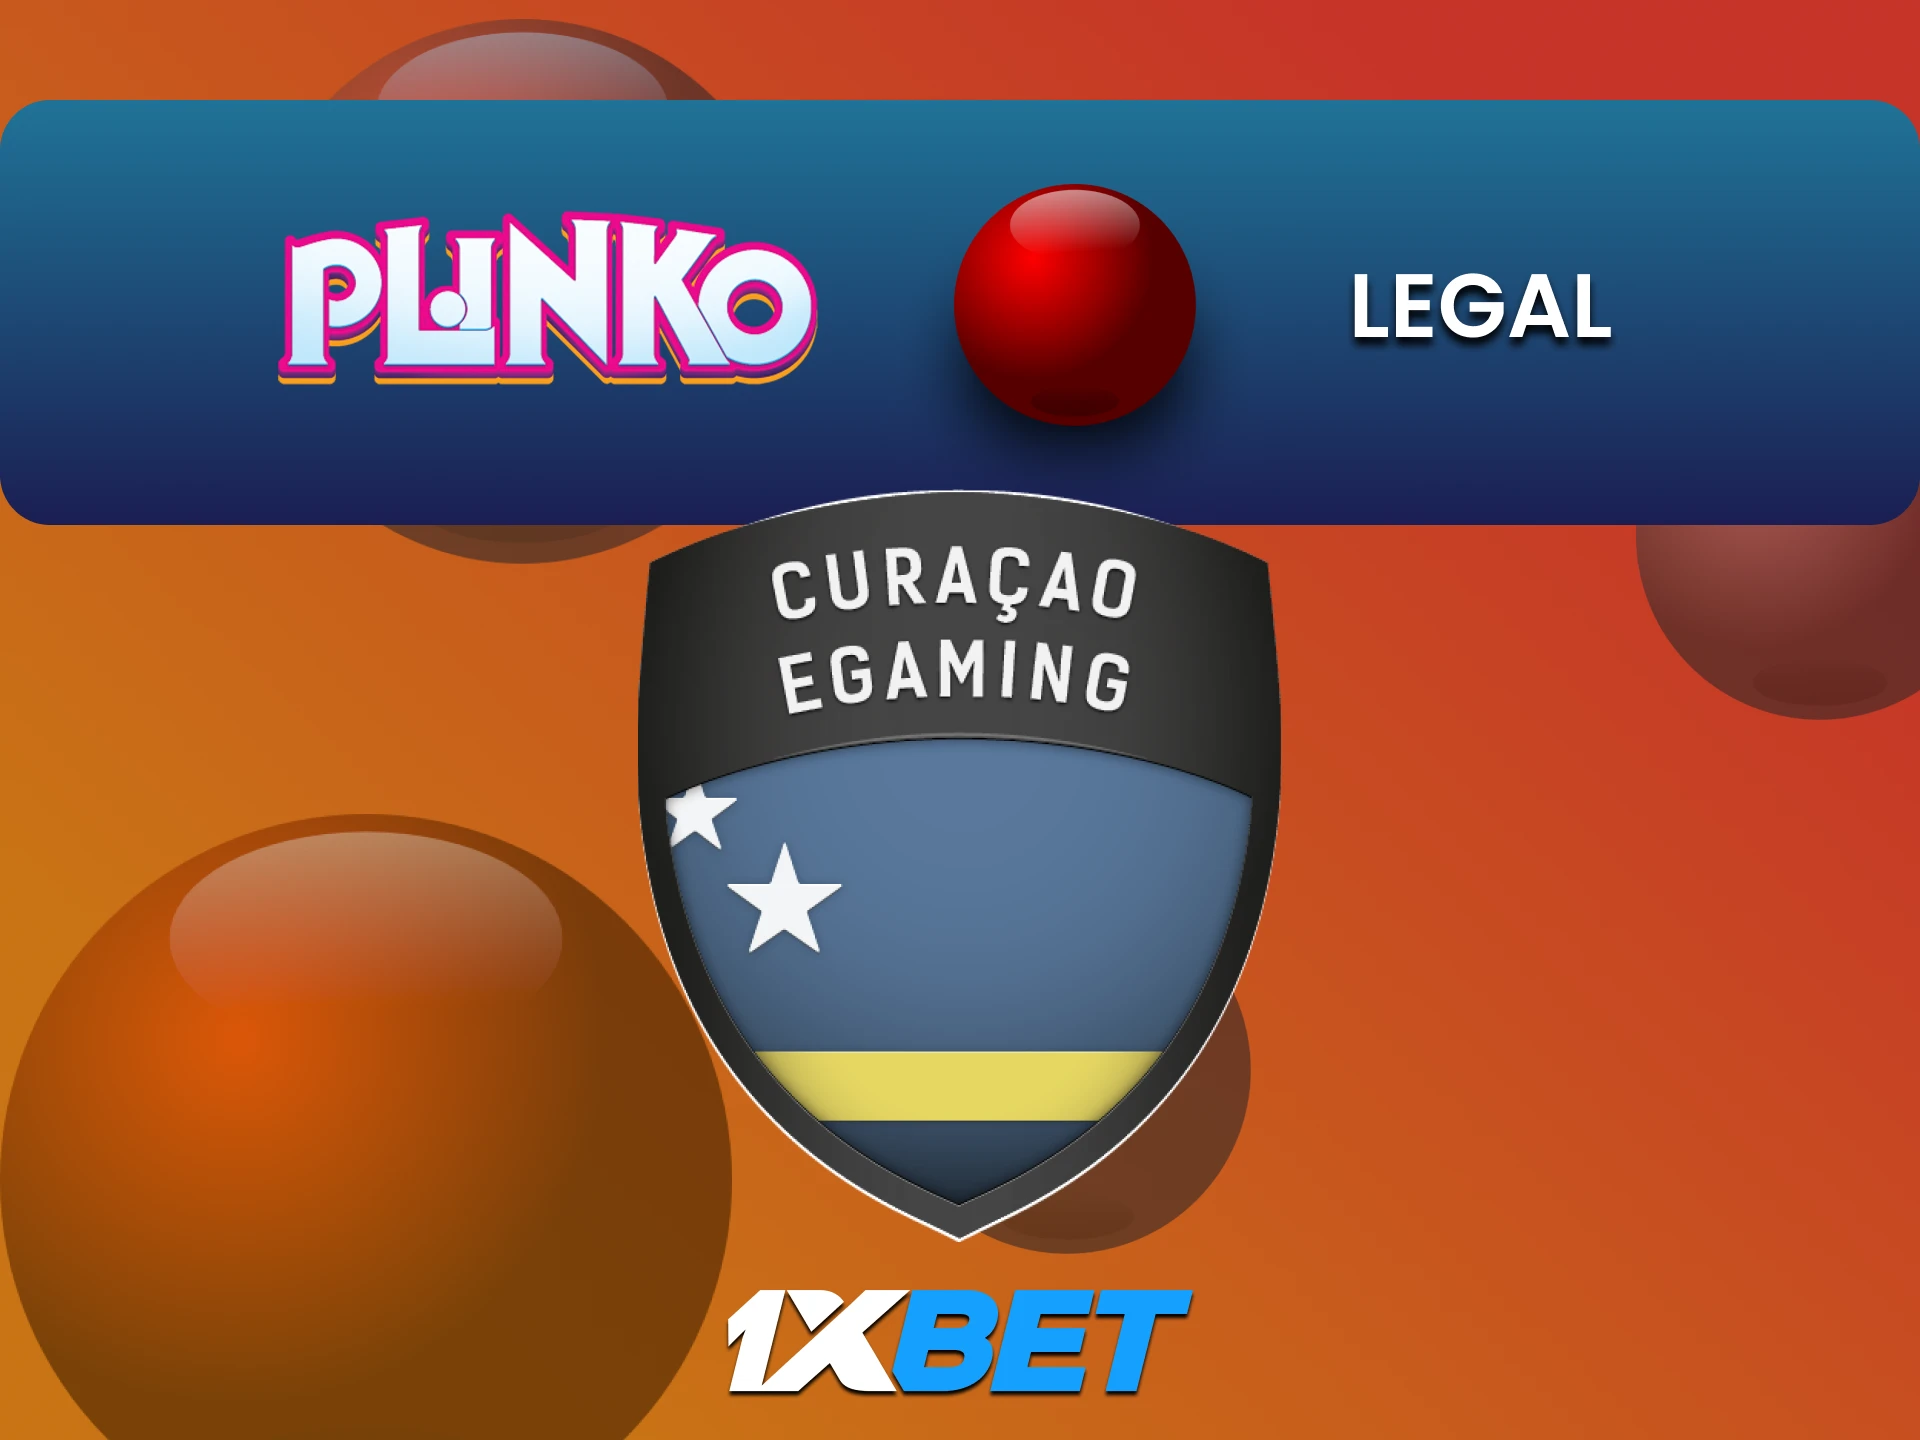 1xbet is legal to play Plinko.